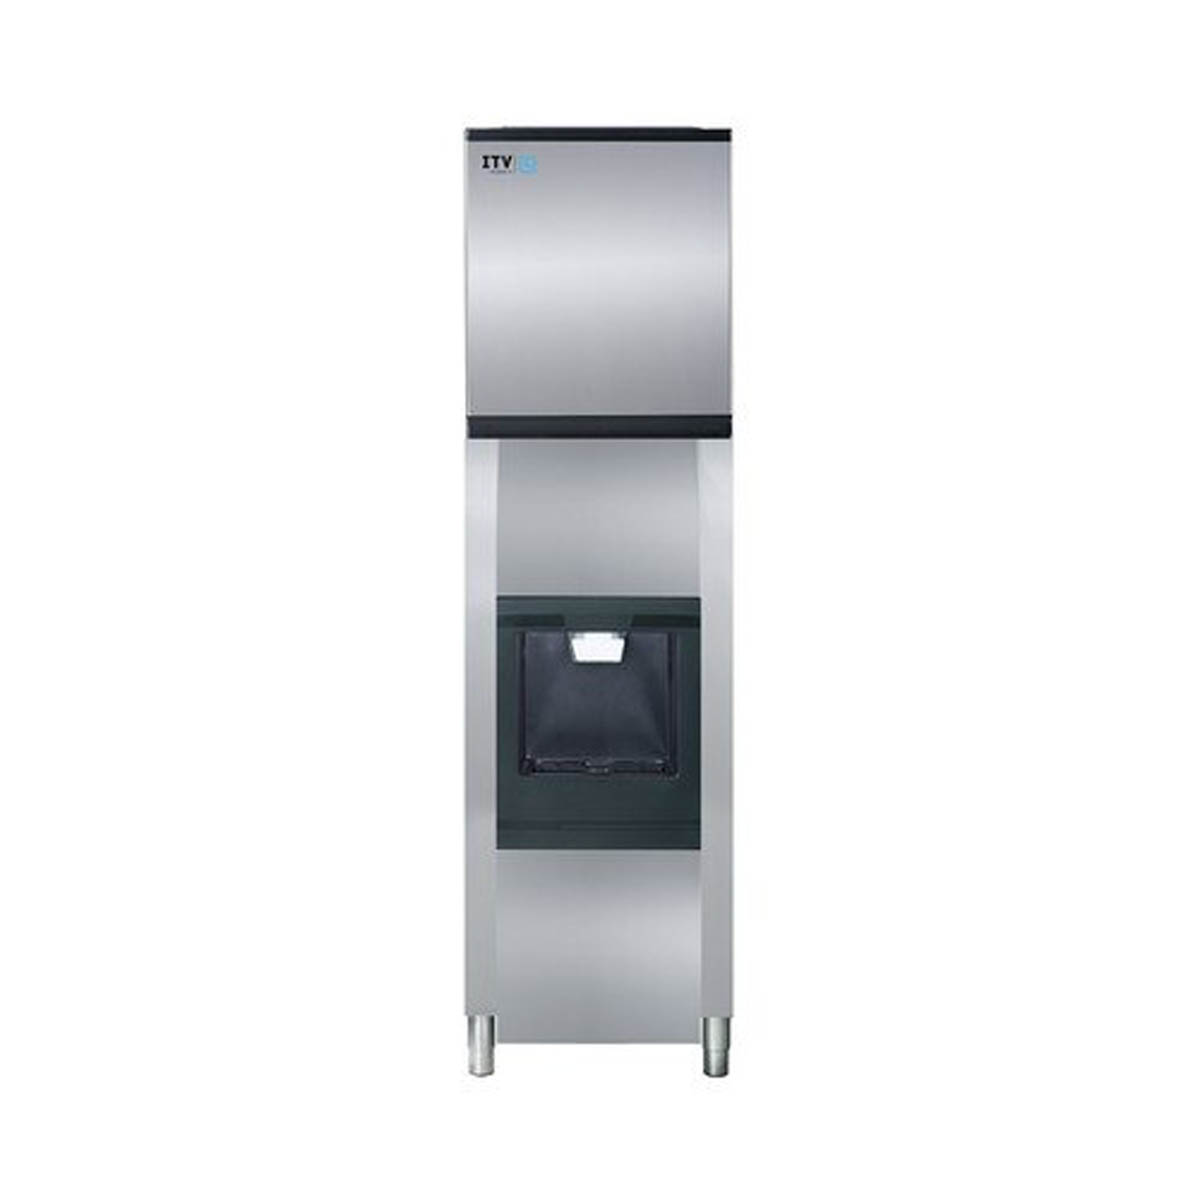 ITV Ice Makers SPIKA MS 700/DHD 130-22 Air-Cooled Full or Half Cube 668 lbs Ice Maker with Ice Dispenser 128 lbs Storage